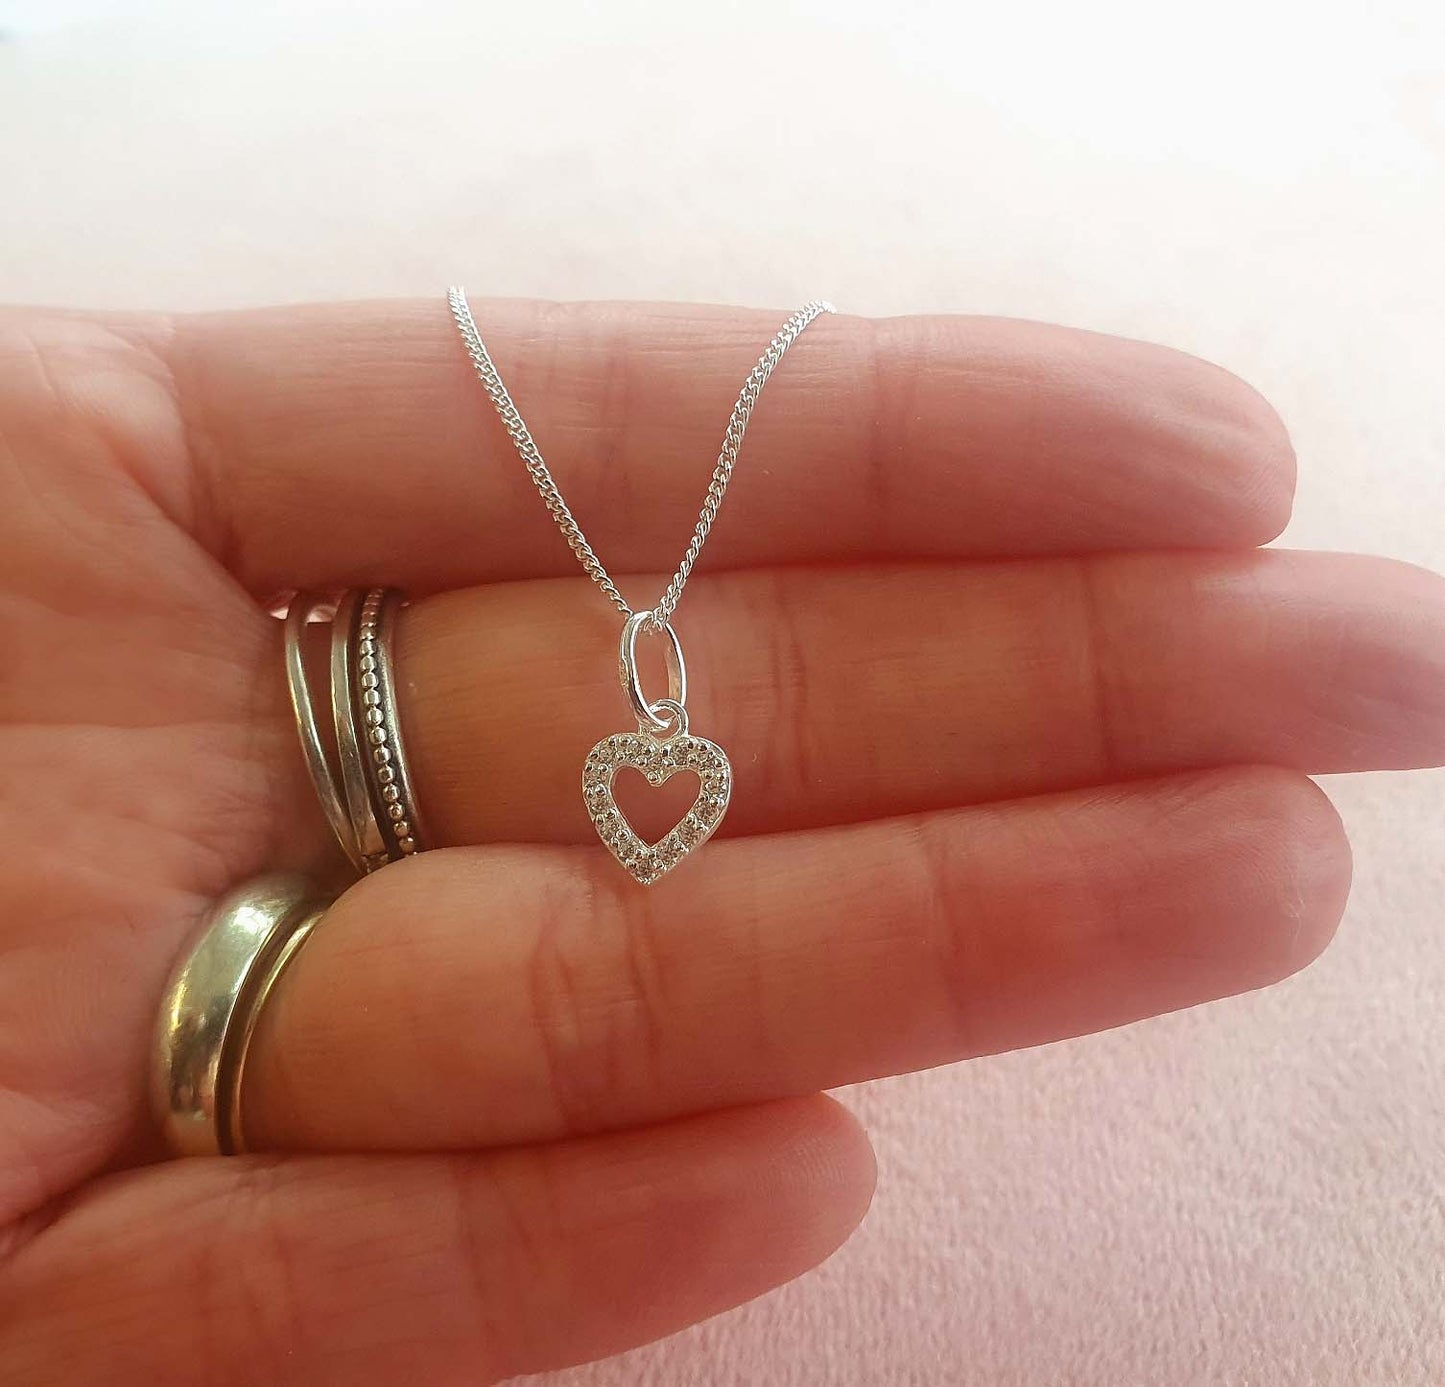 Bridesmaid Heart Necklace with Cubic Zirconia in Sterling Silver 925, Personalised Gift